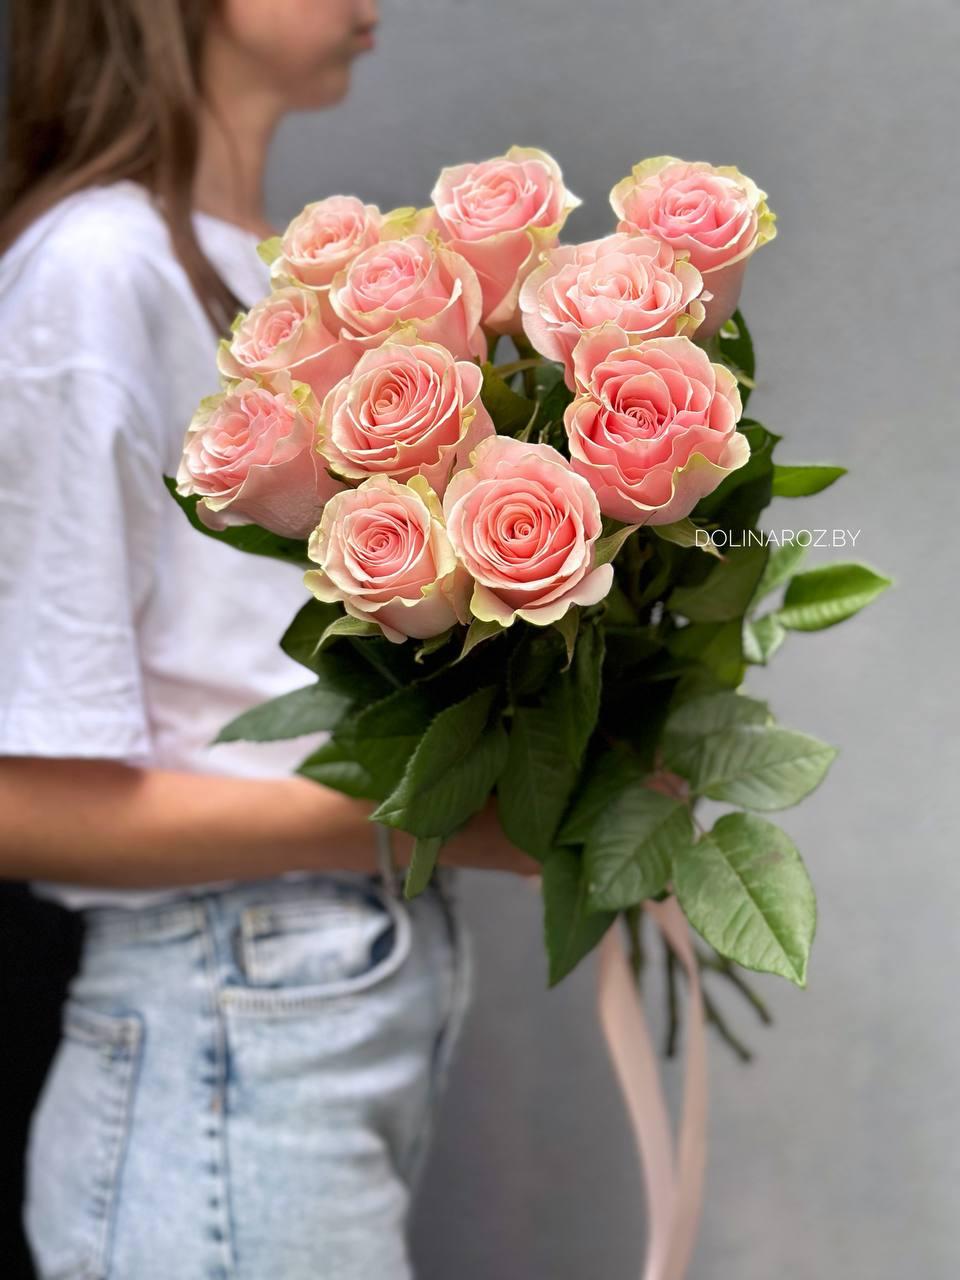 Bouquet of roses "Nice gift"